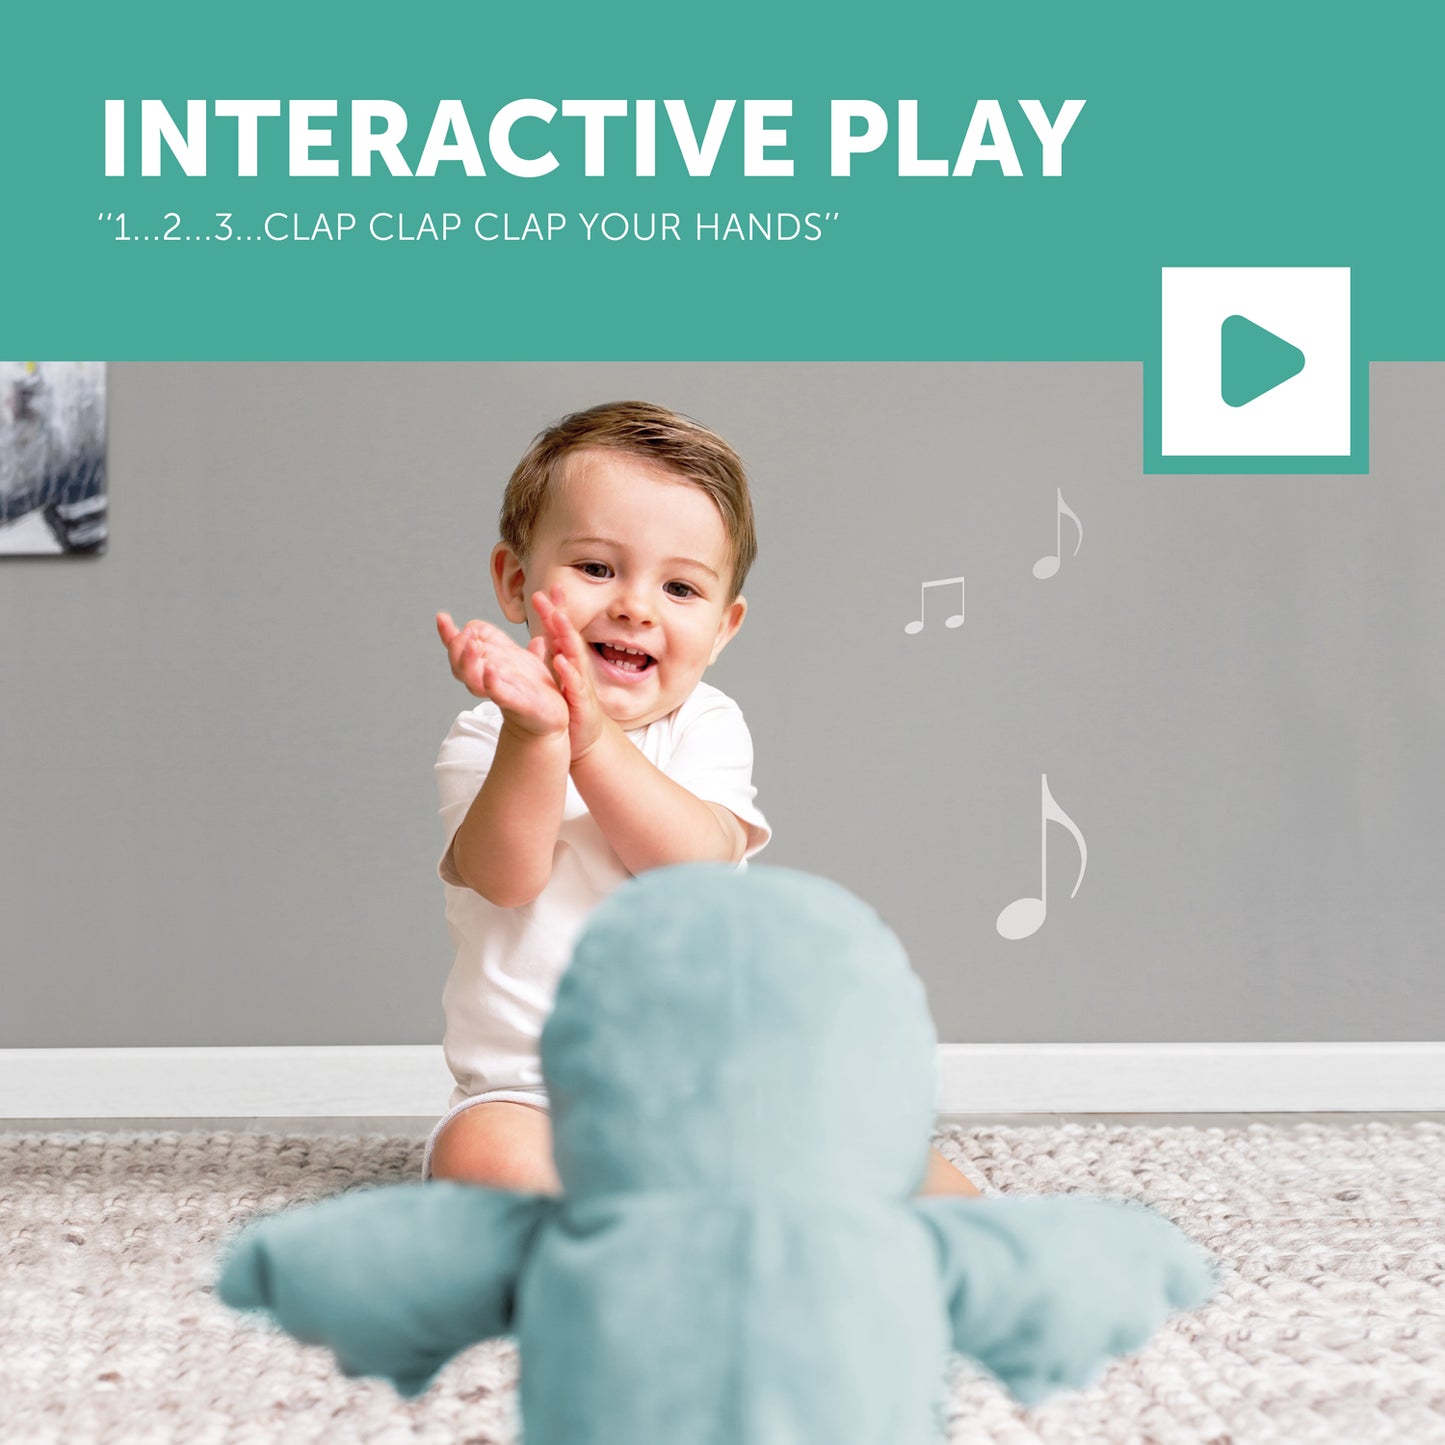 [Zazu] Timo the Toucan, Interactive Soft Toy with Clapping Hands and Sound